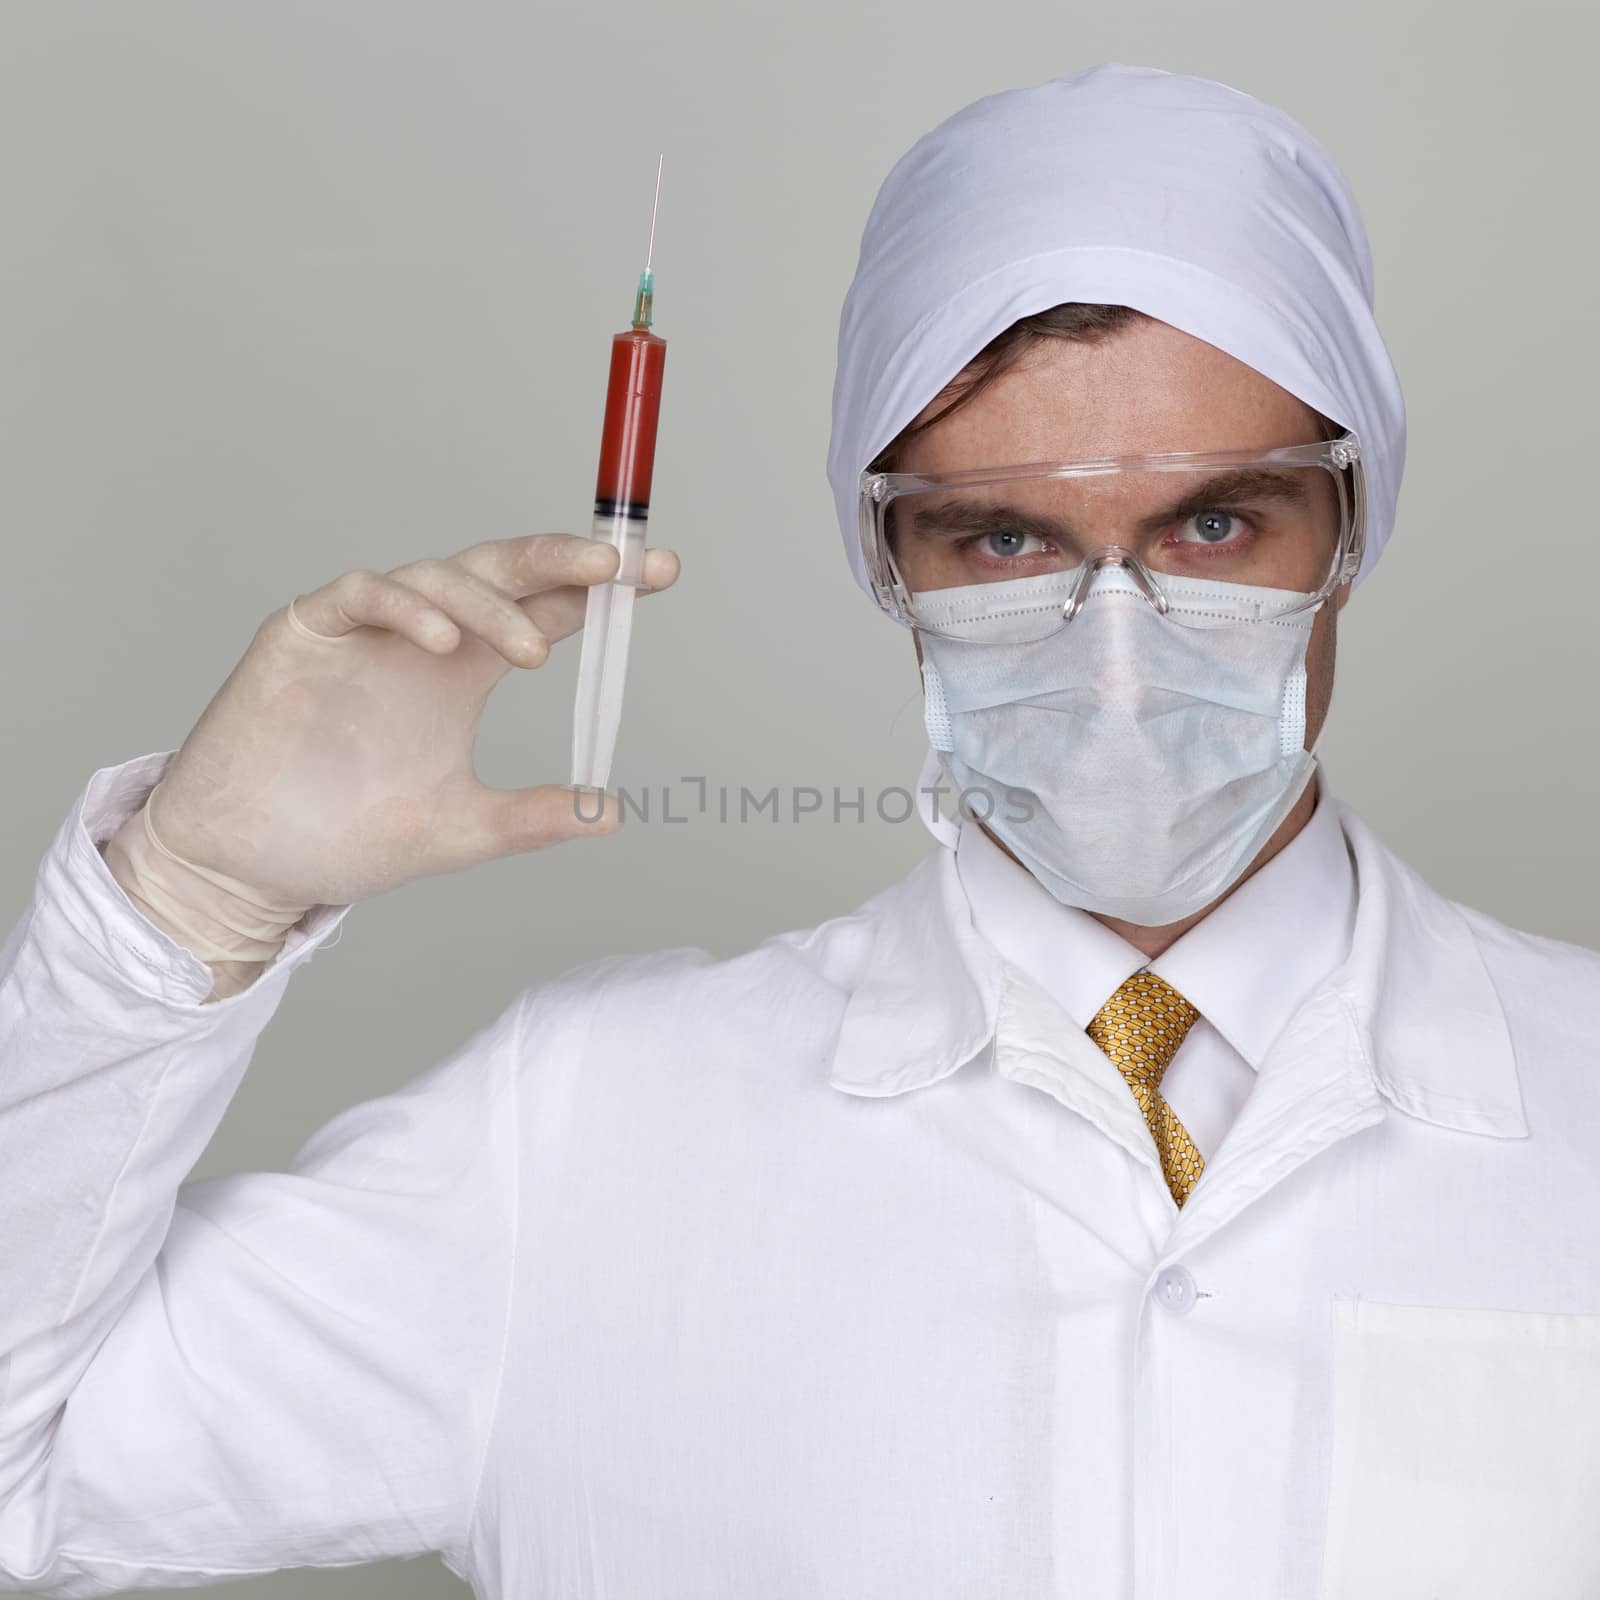 Confident surgeon holding a syringe by andersonrise